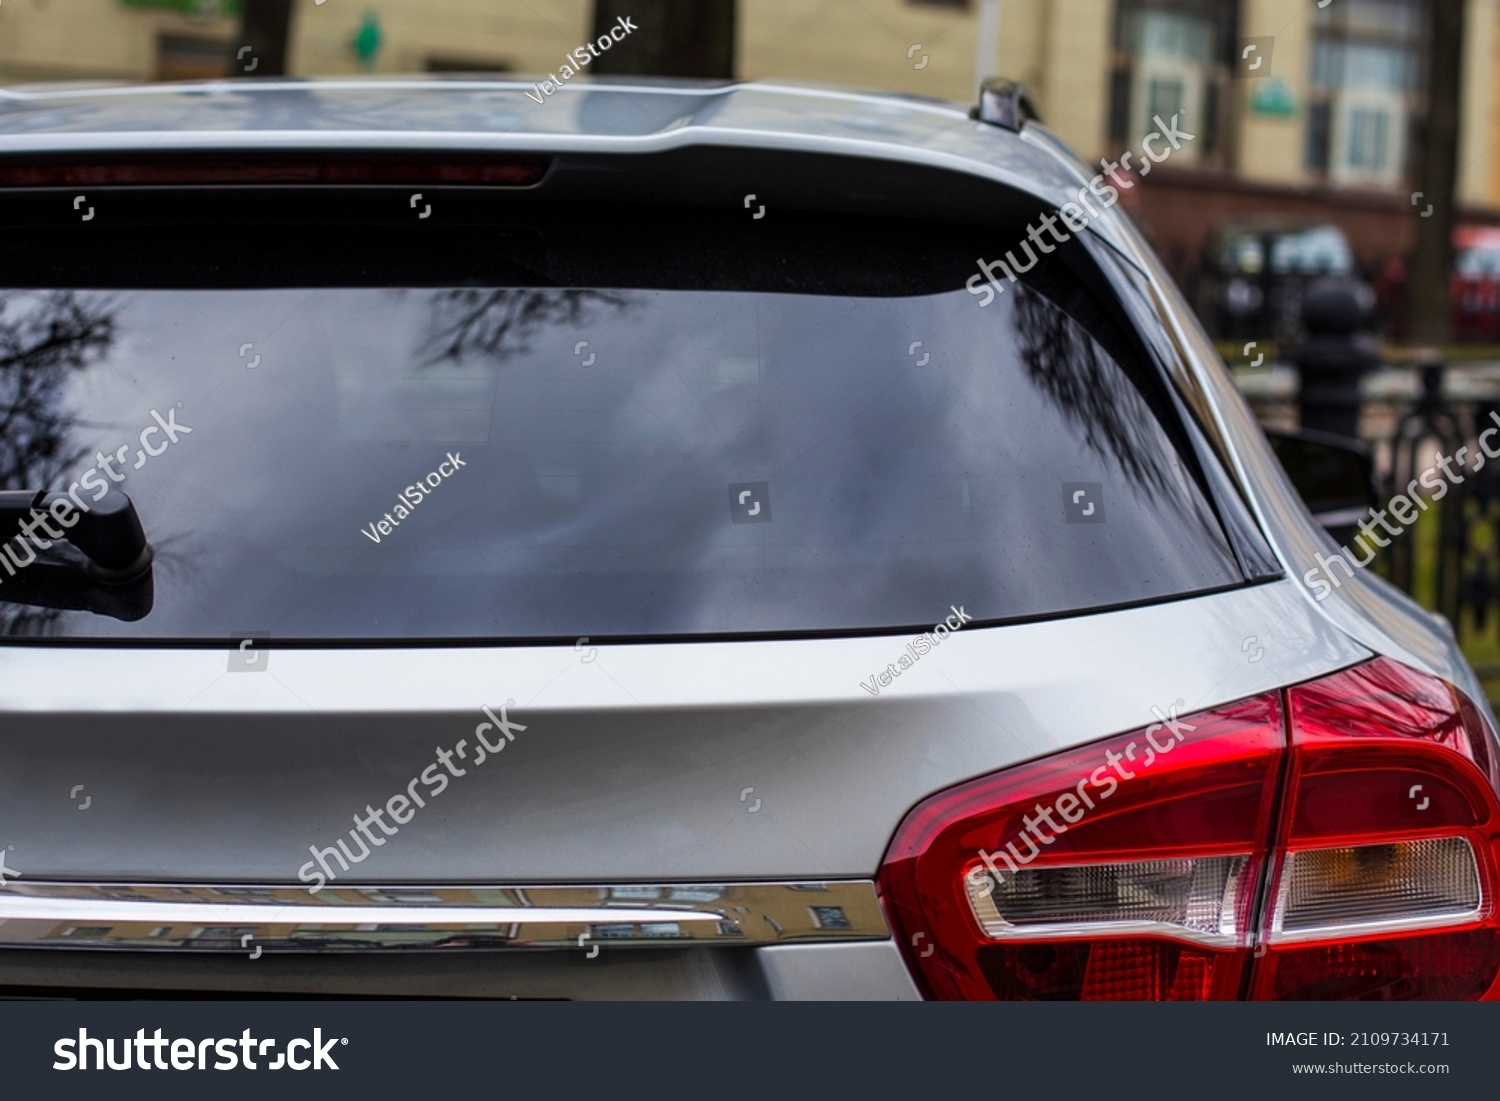 Car rear window mockup for stickers mock up outdoors, Places For Your Design, Car decal #2109734171